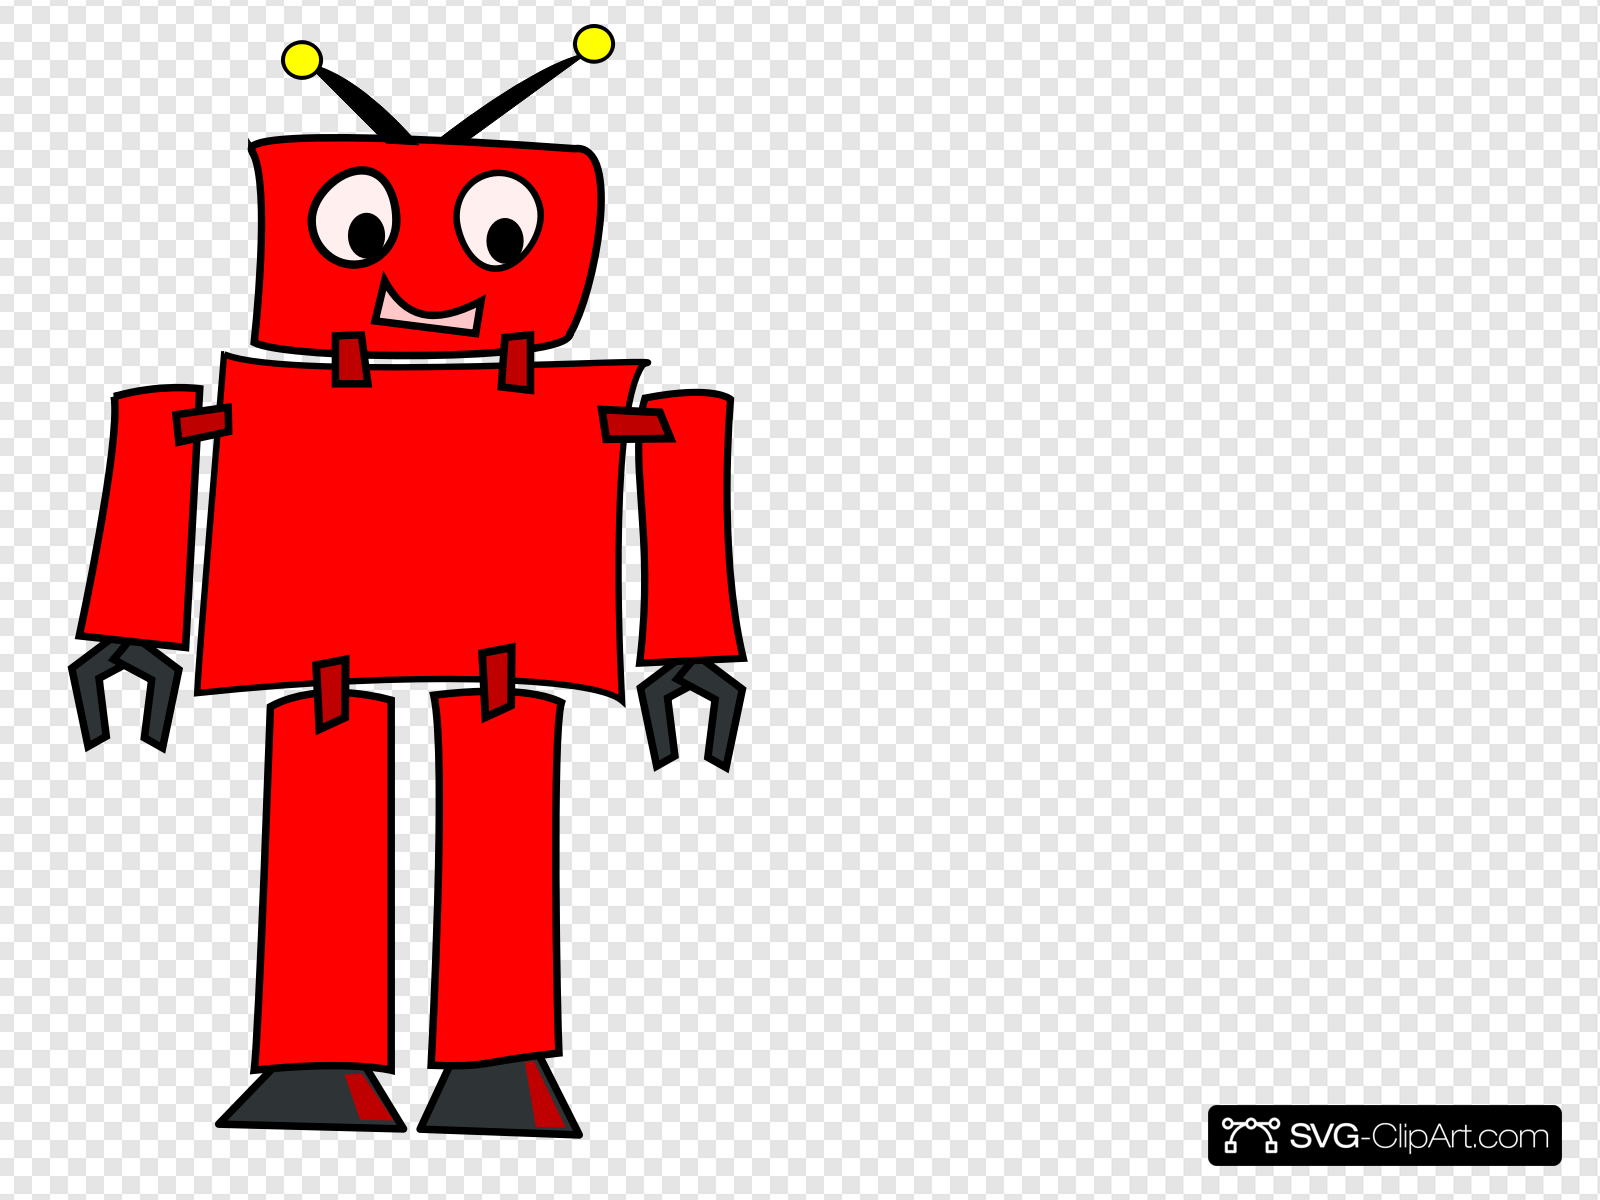 Red Robot Clip art, Icon and SVG